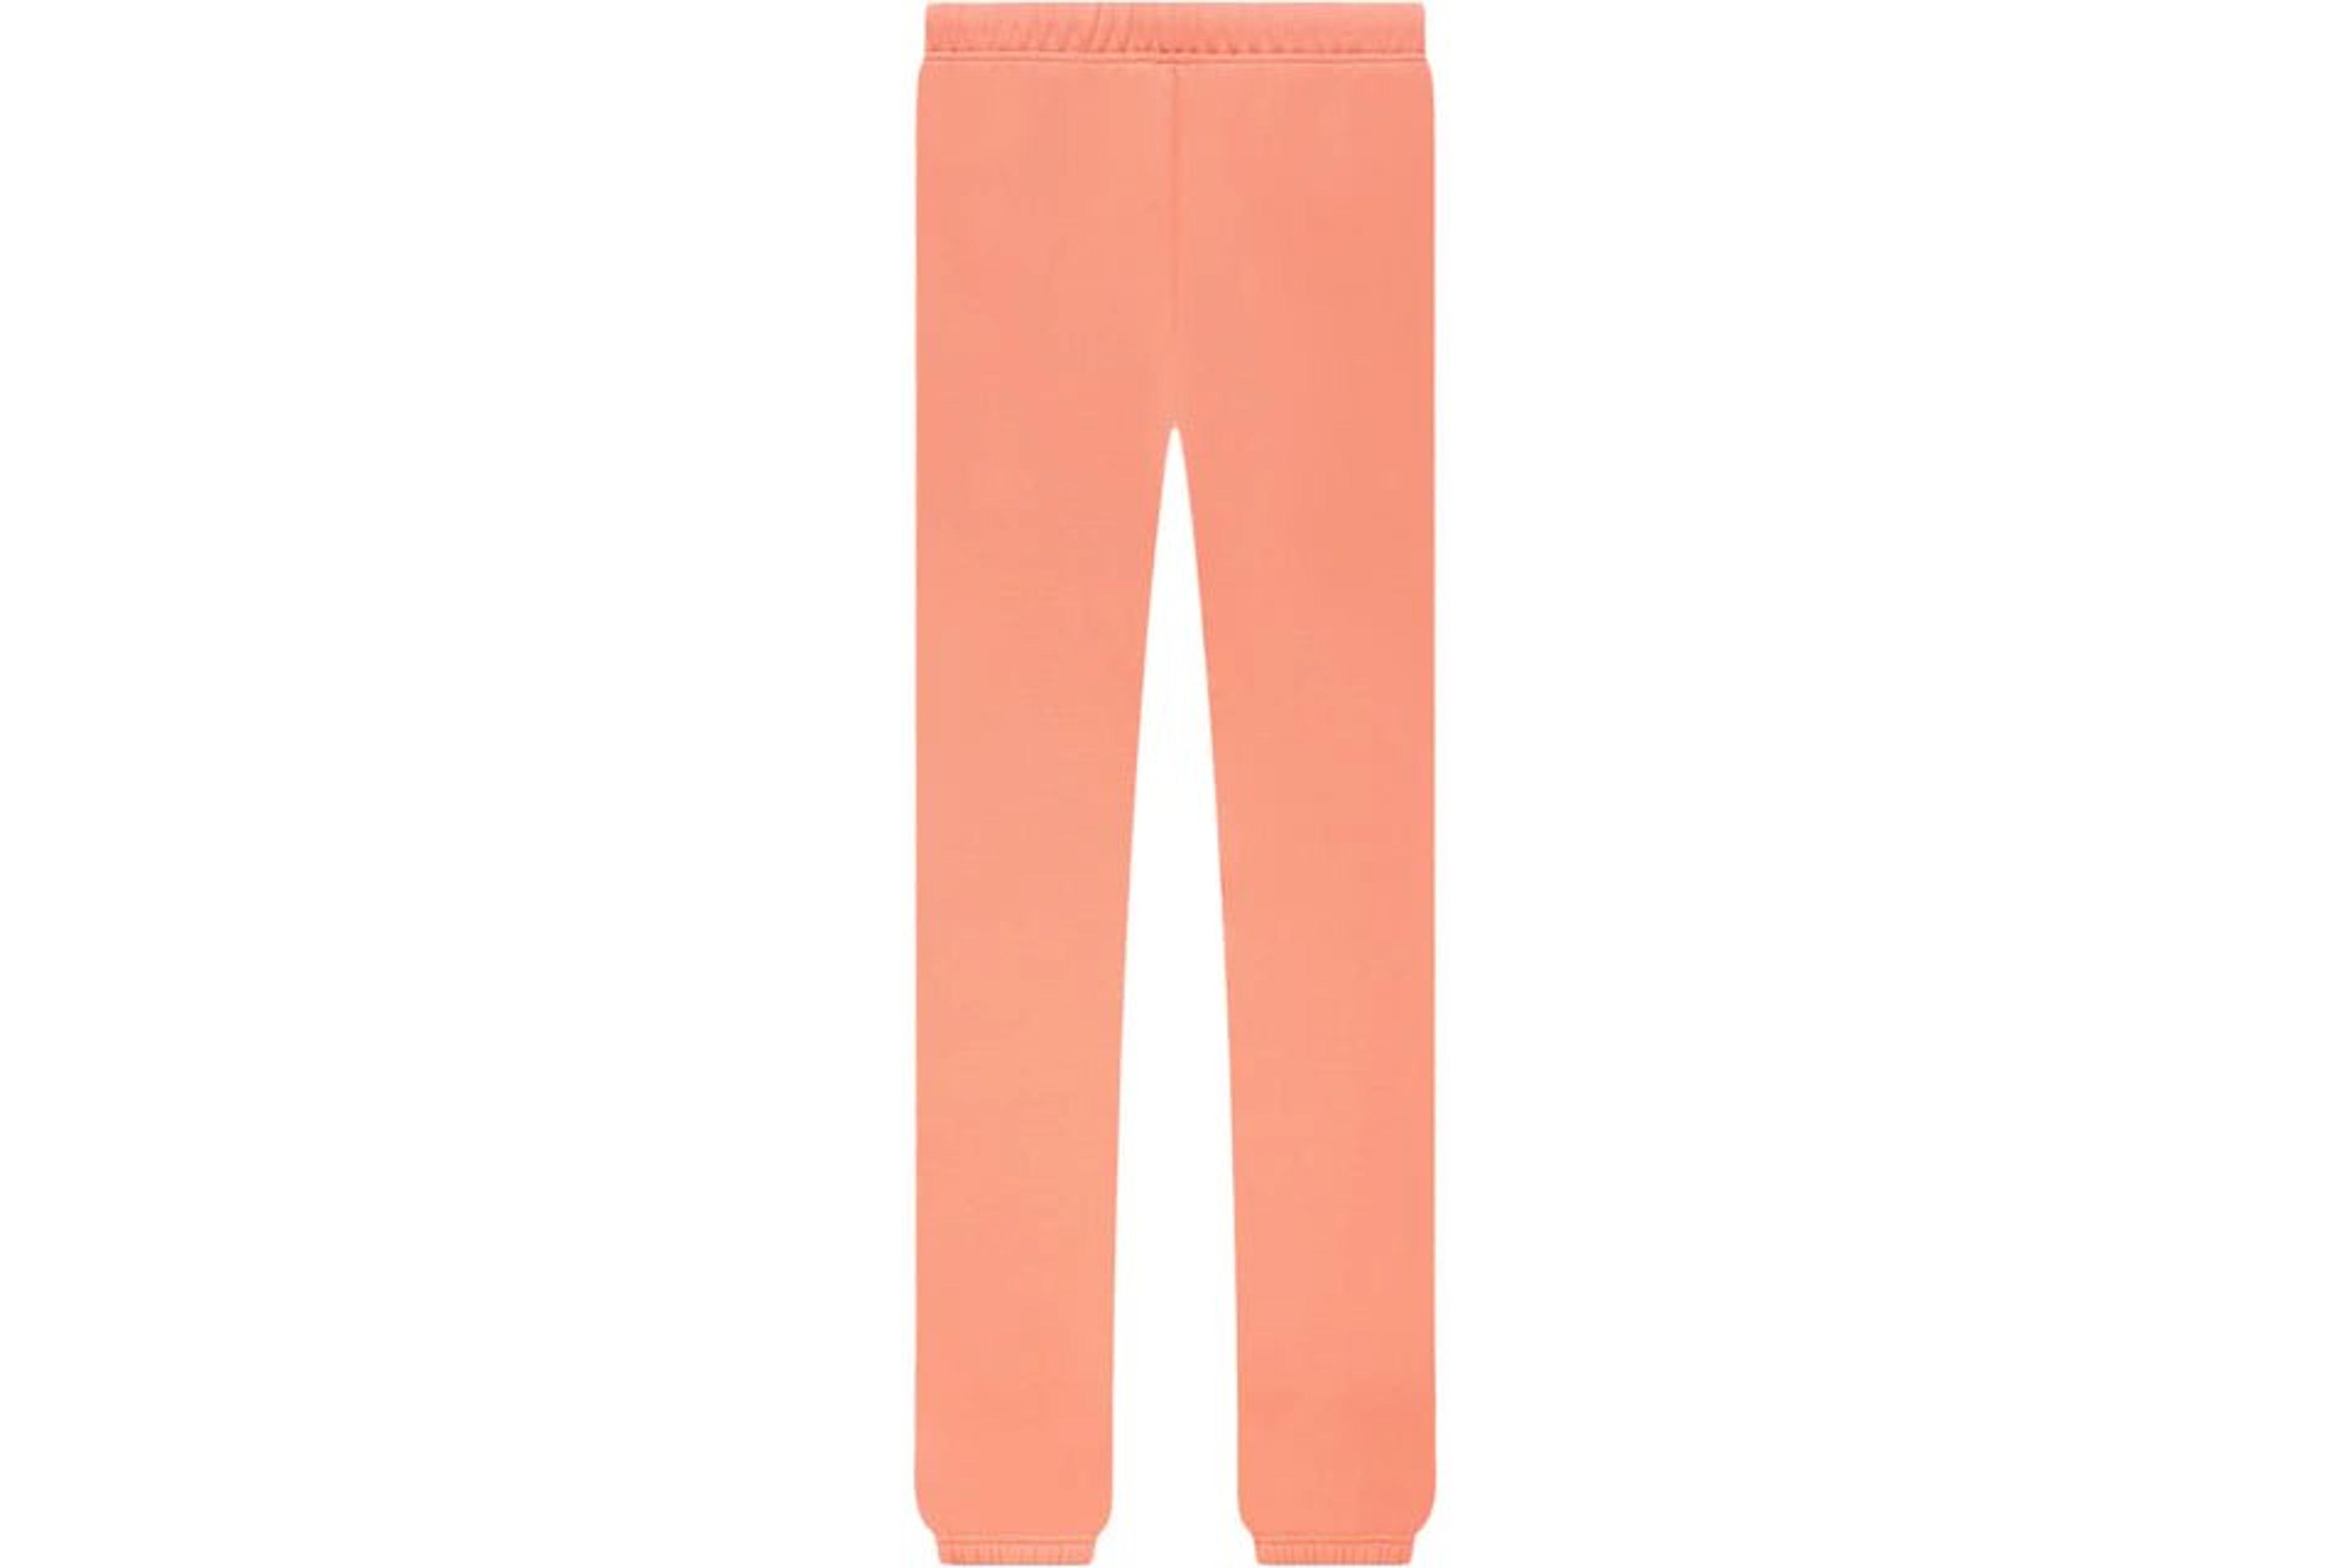 Alternate View 1 of Fear of God Essentials Sweatpant Coral